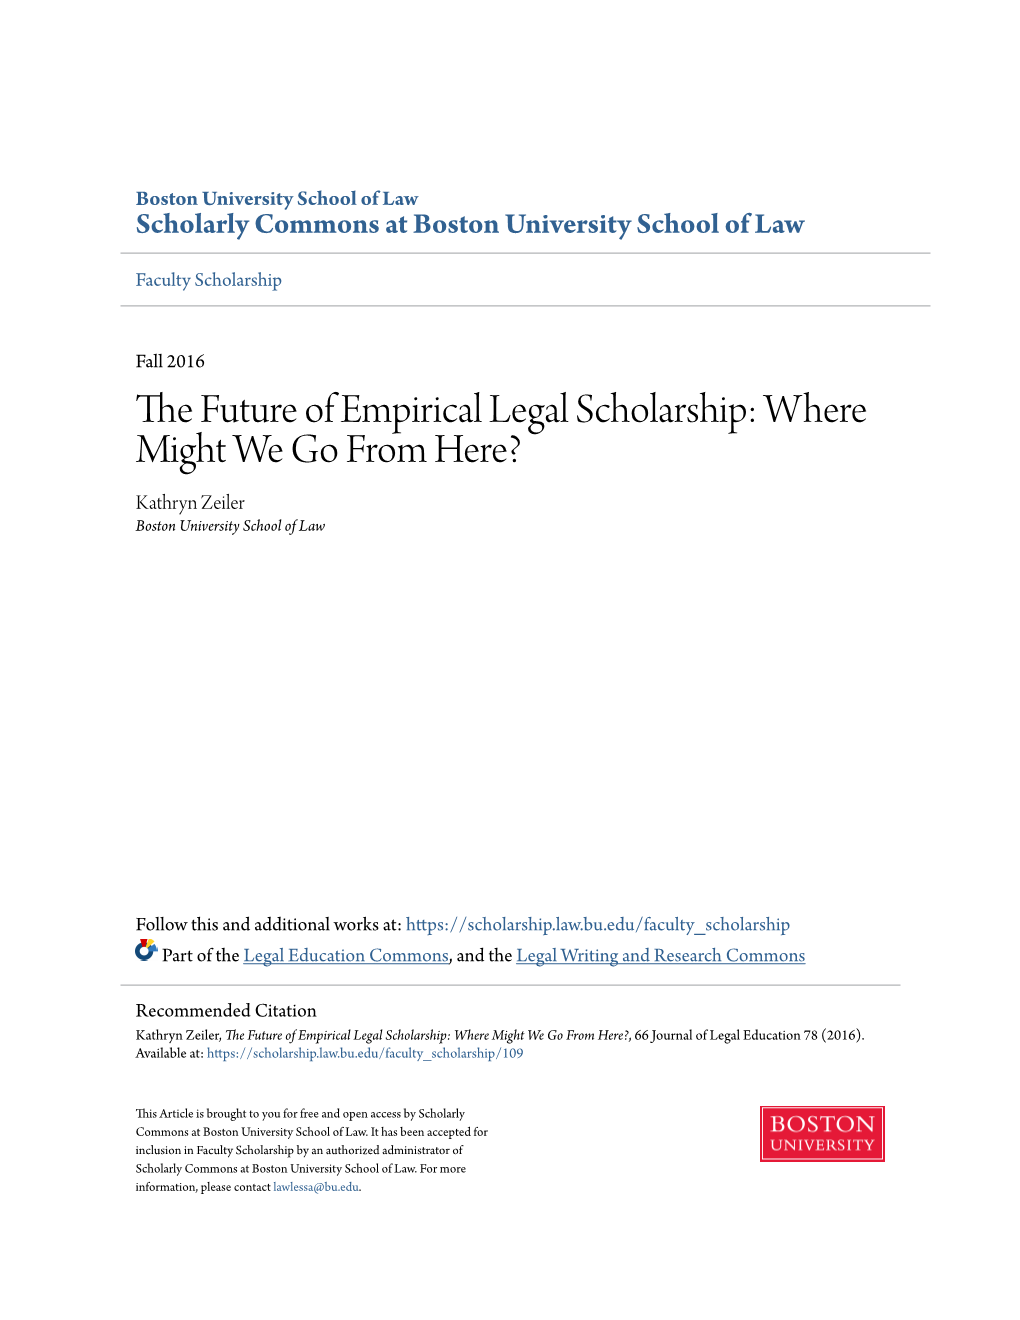 The Future of Empirical Legal Scholarship: Where Might We Go from Here?, 66 Journal of Legal Education 78 (2016)